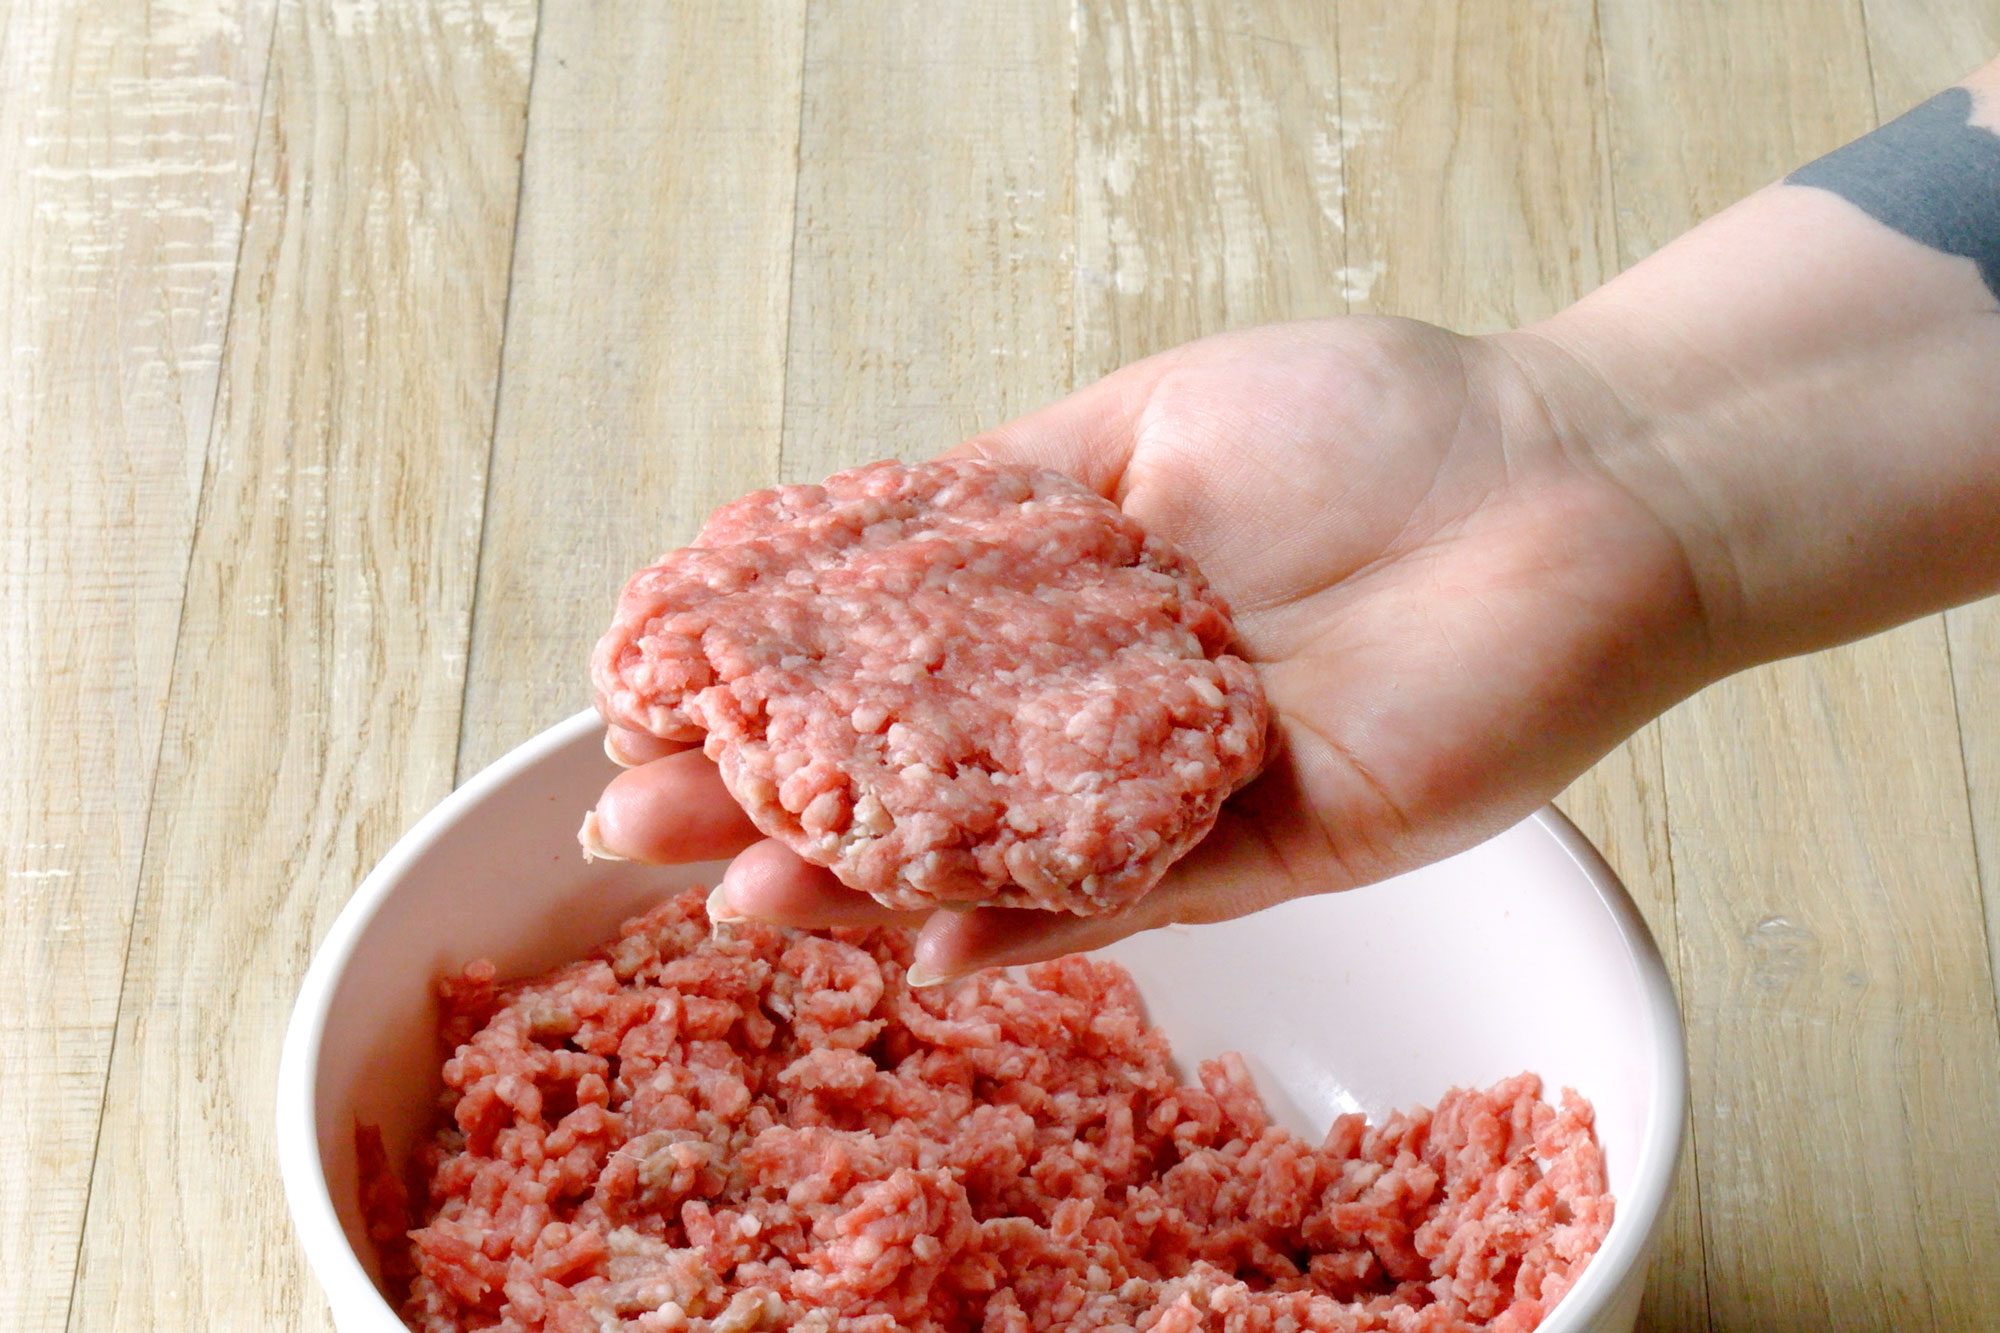 Shape the ground beef into burger patties